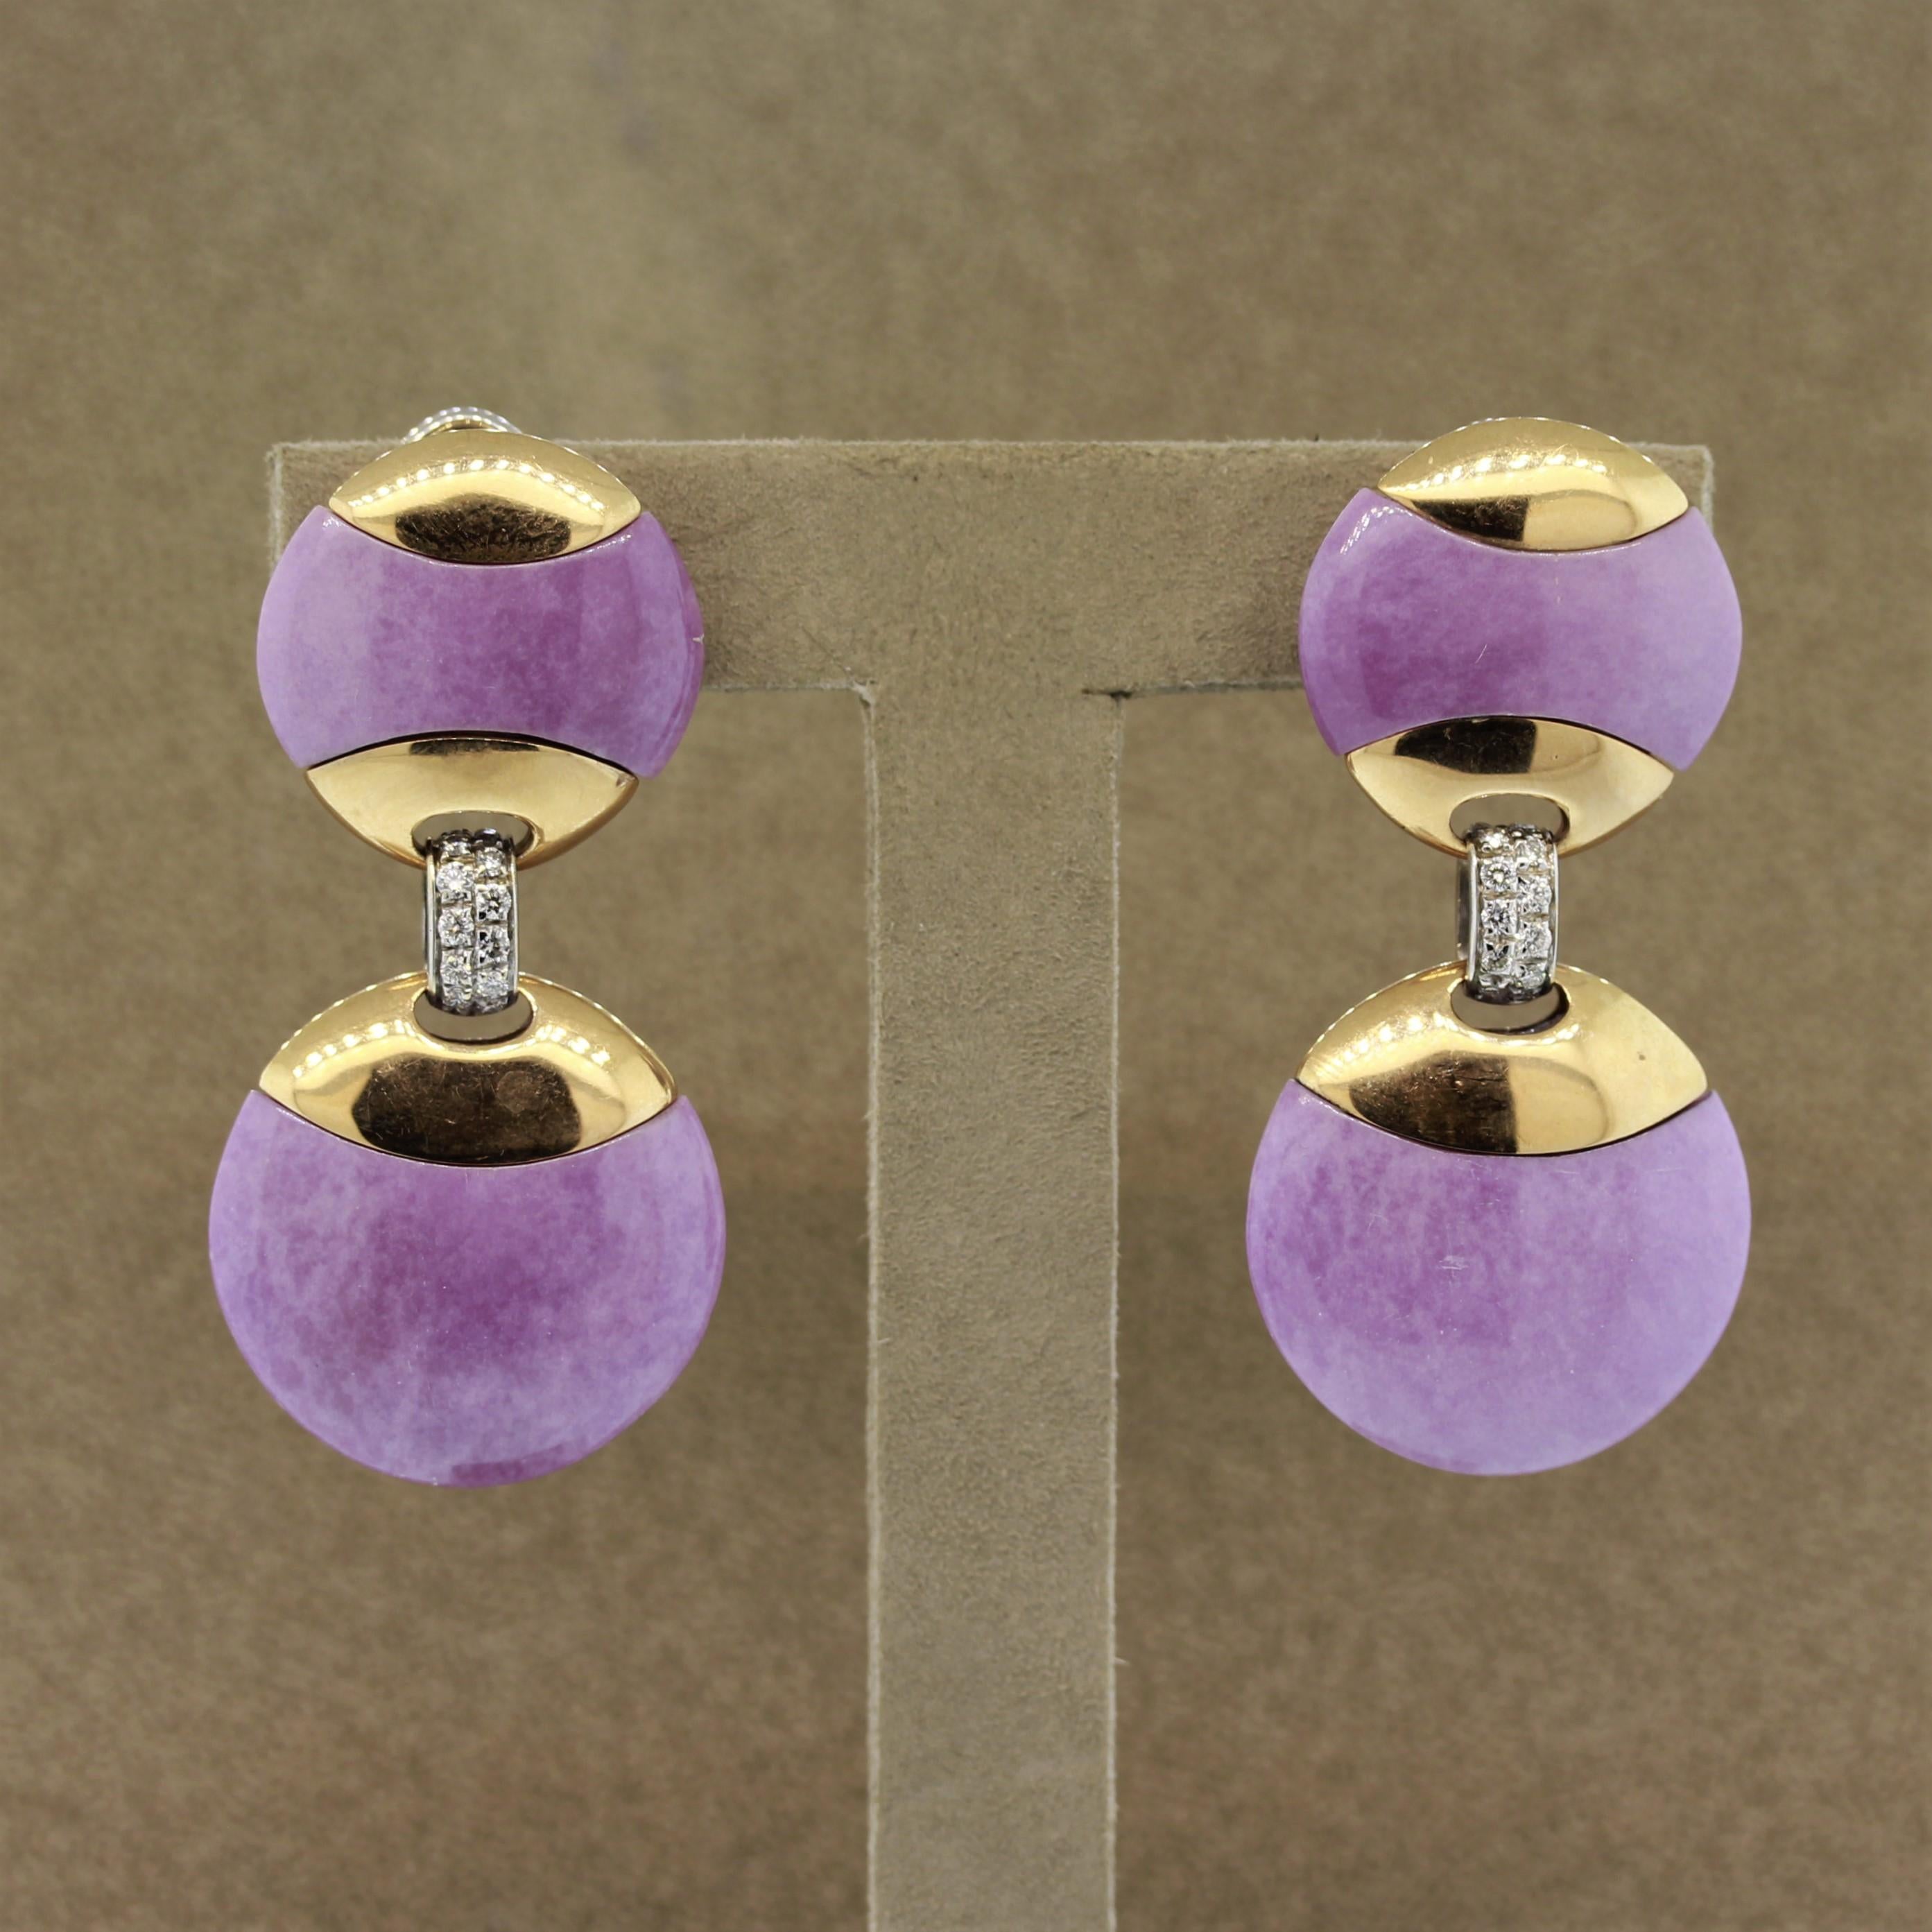 A unique pair of earrings featuring 22.40 carats of lavender jade which has been hand carved and shaped into matching discs. They are set with 18k gold which complete form and are set as a drop from one another. They are accented by 0.42 carats of